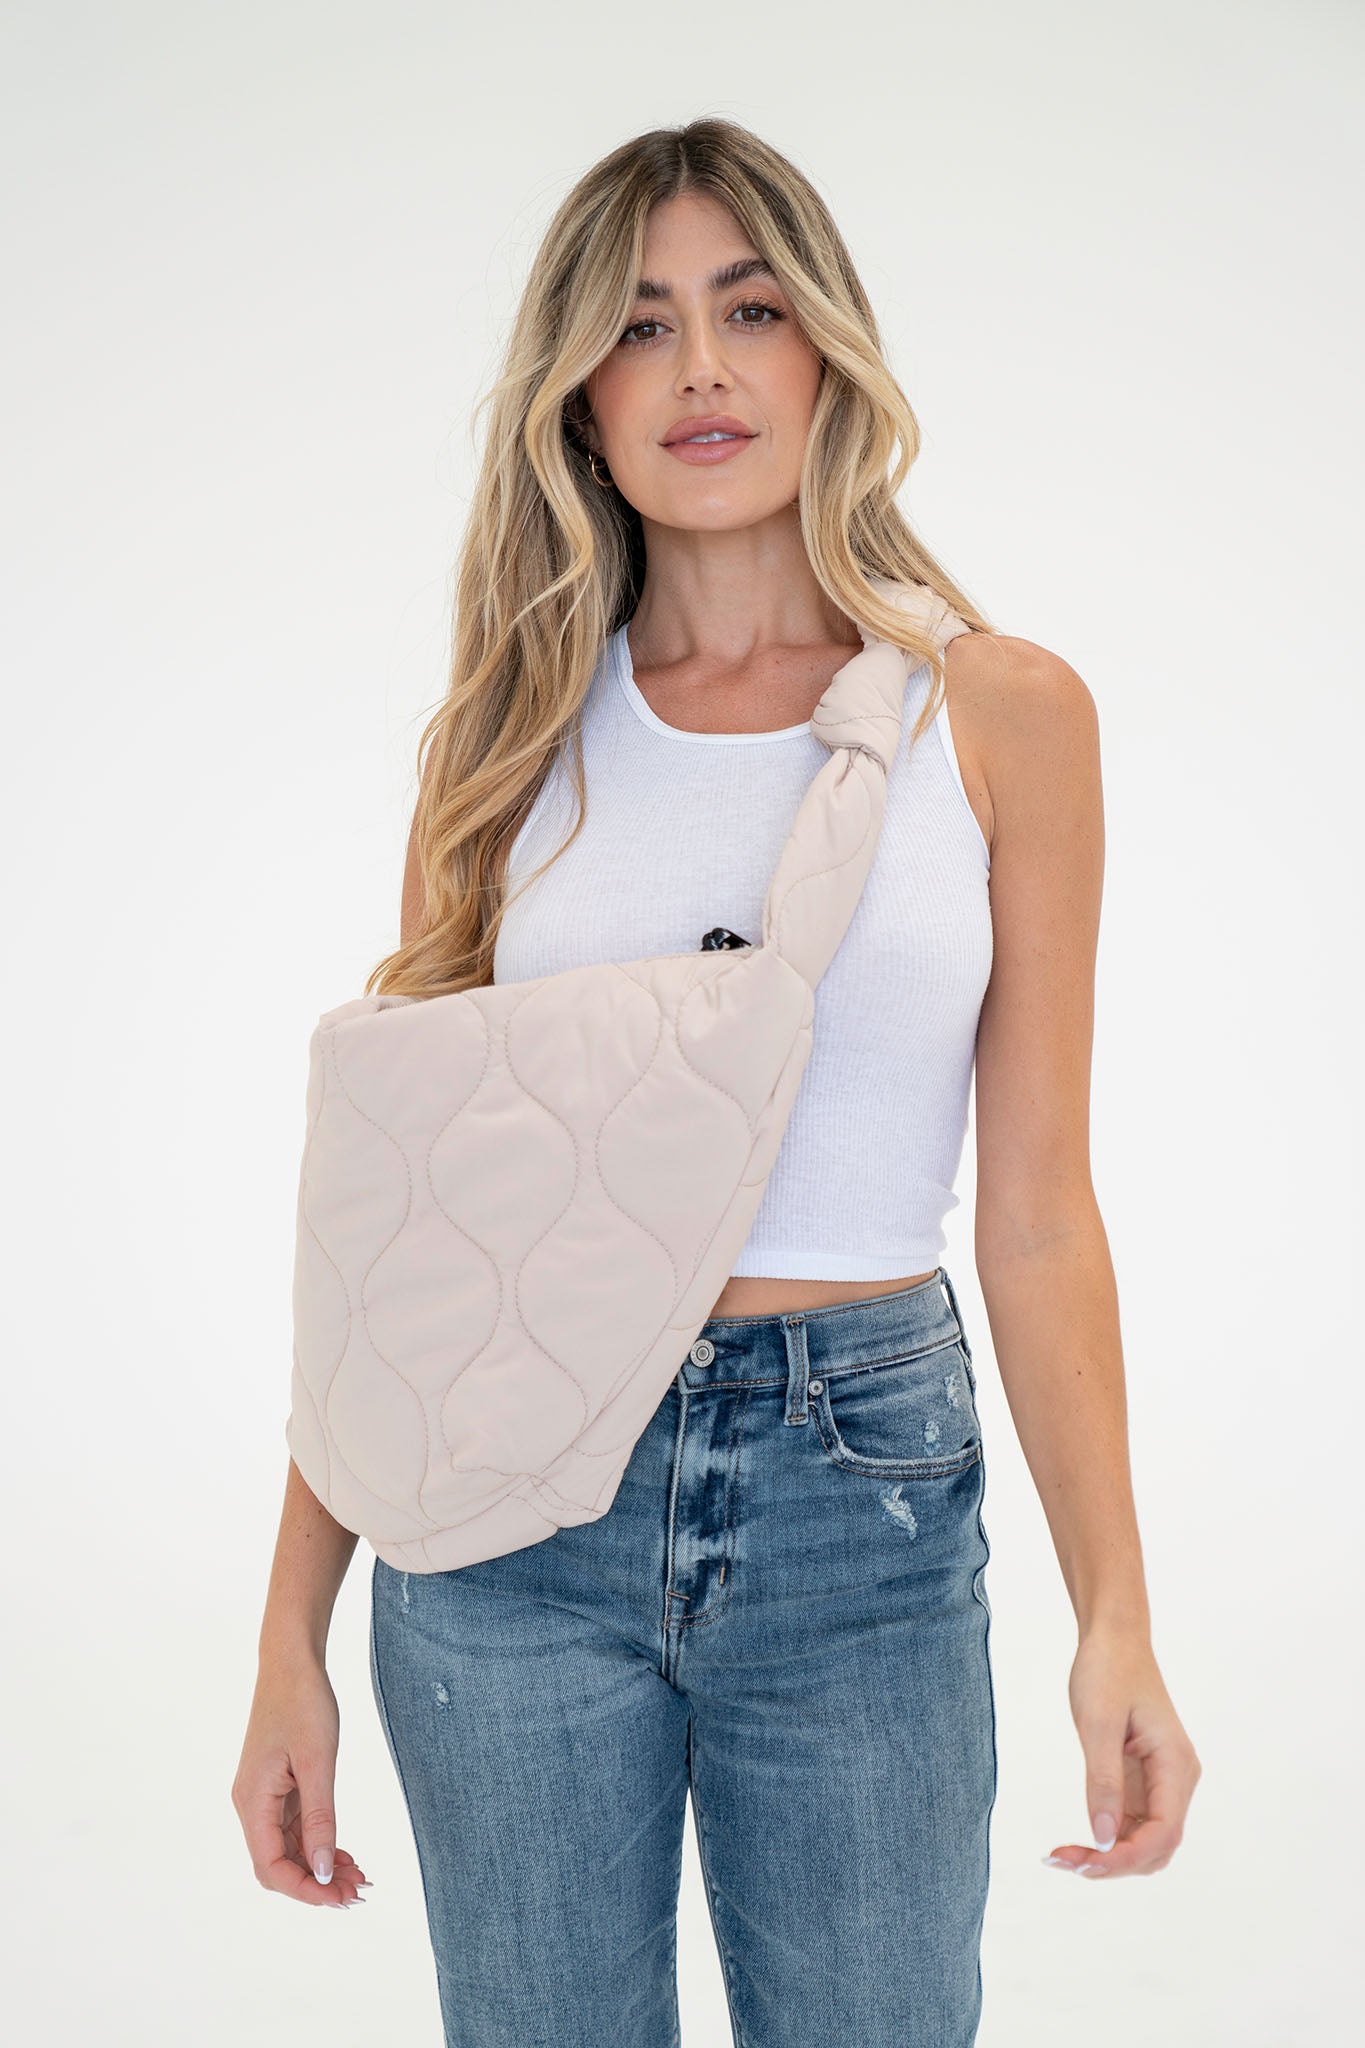 View 1 of Julia Quilted Shoulder Bag in Sand, a Bags from Larrea Cove. Detail: Introducing the Julia Quilted Shoulder Bag in Sand – a stylish, c...